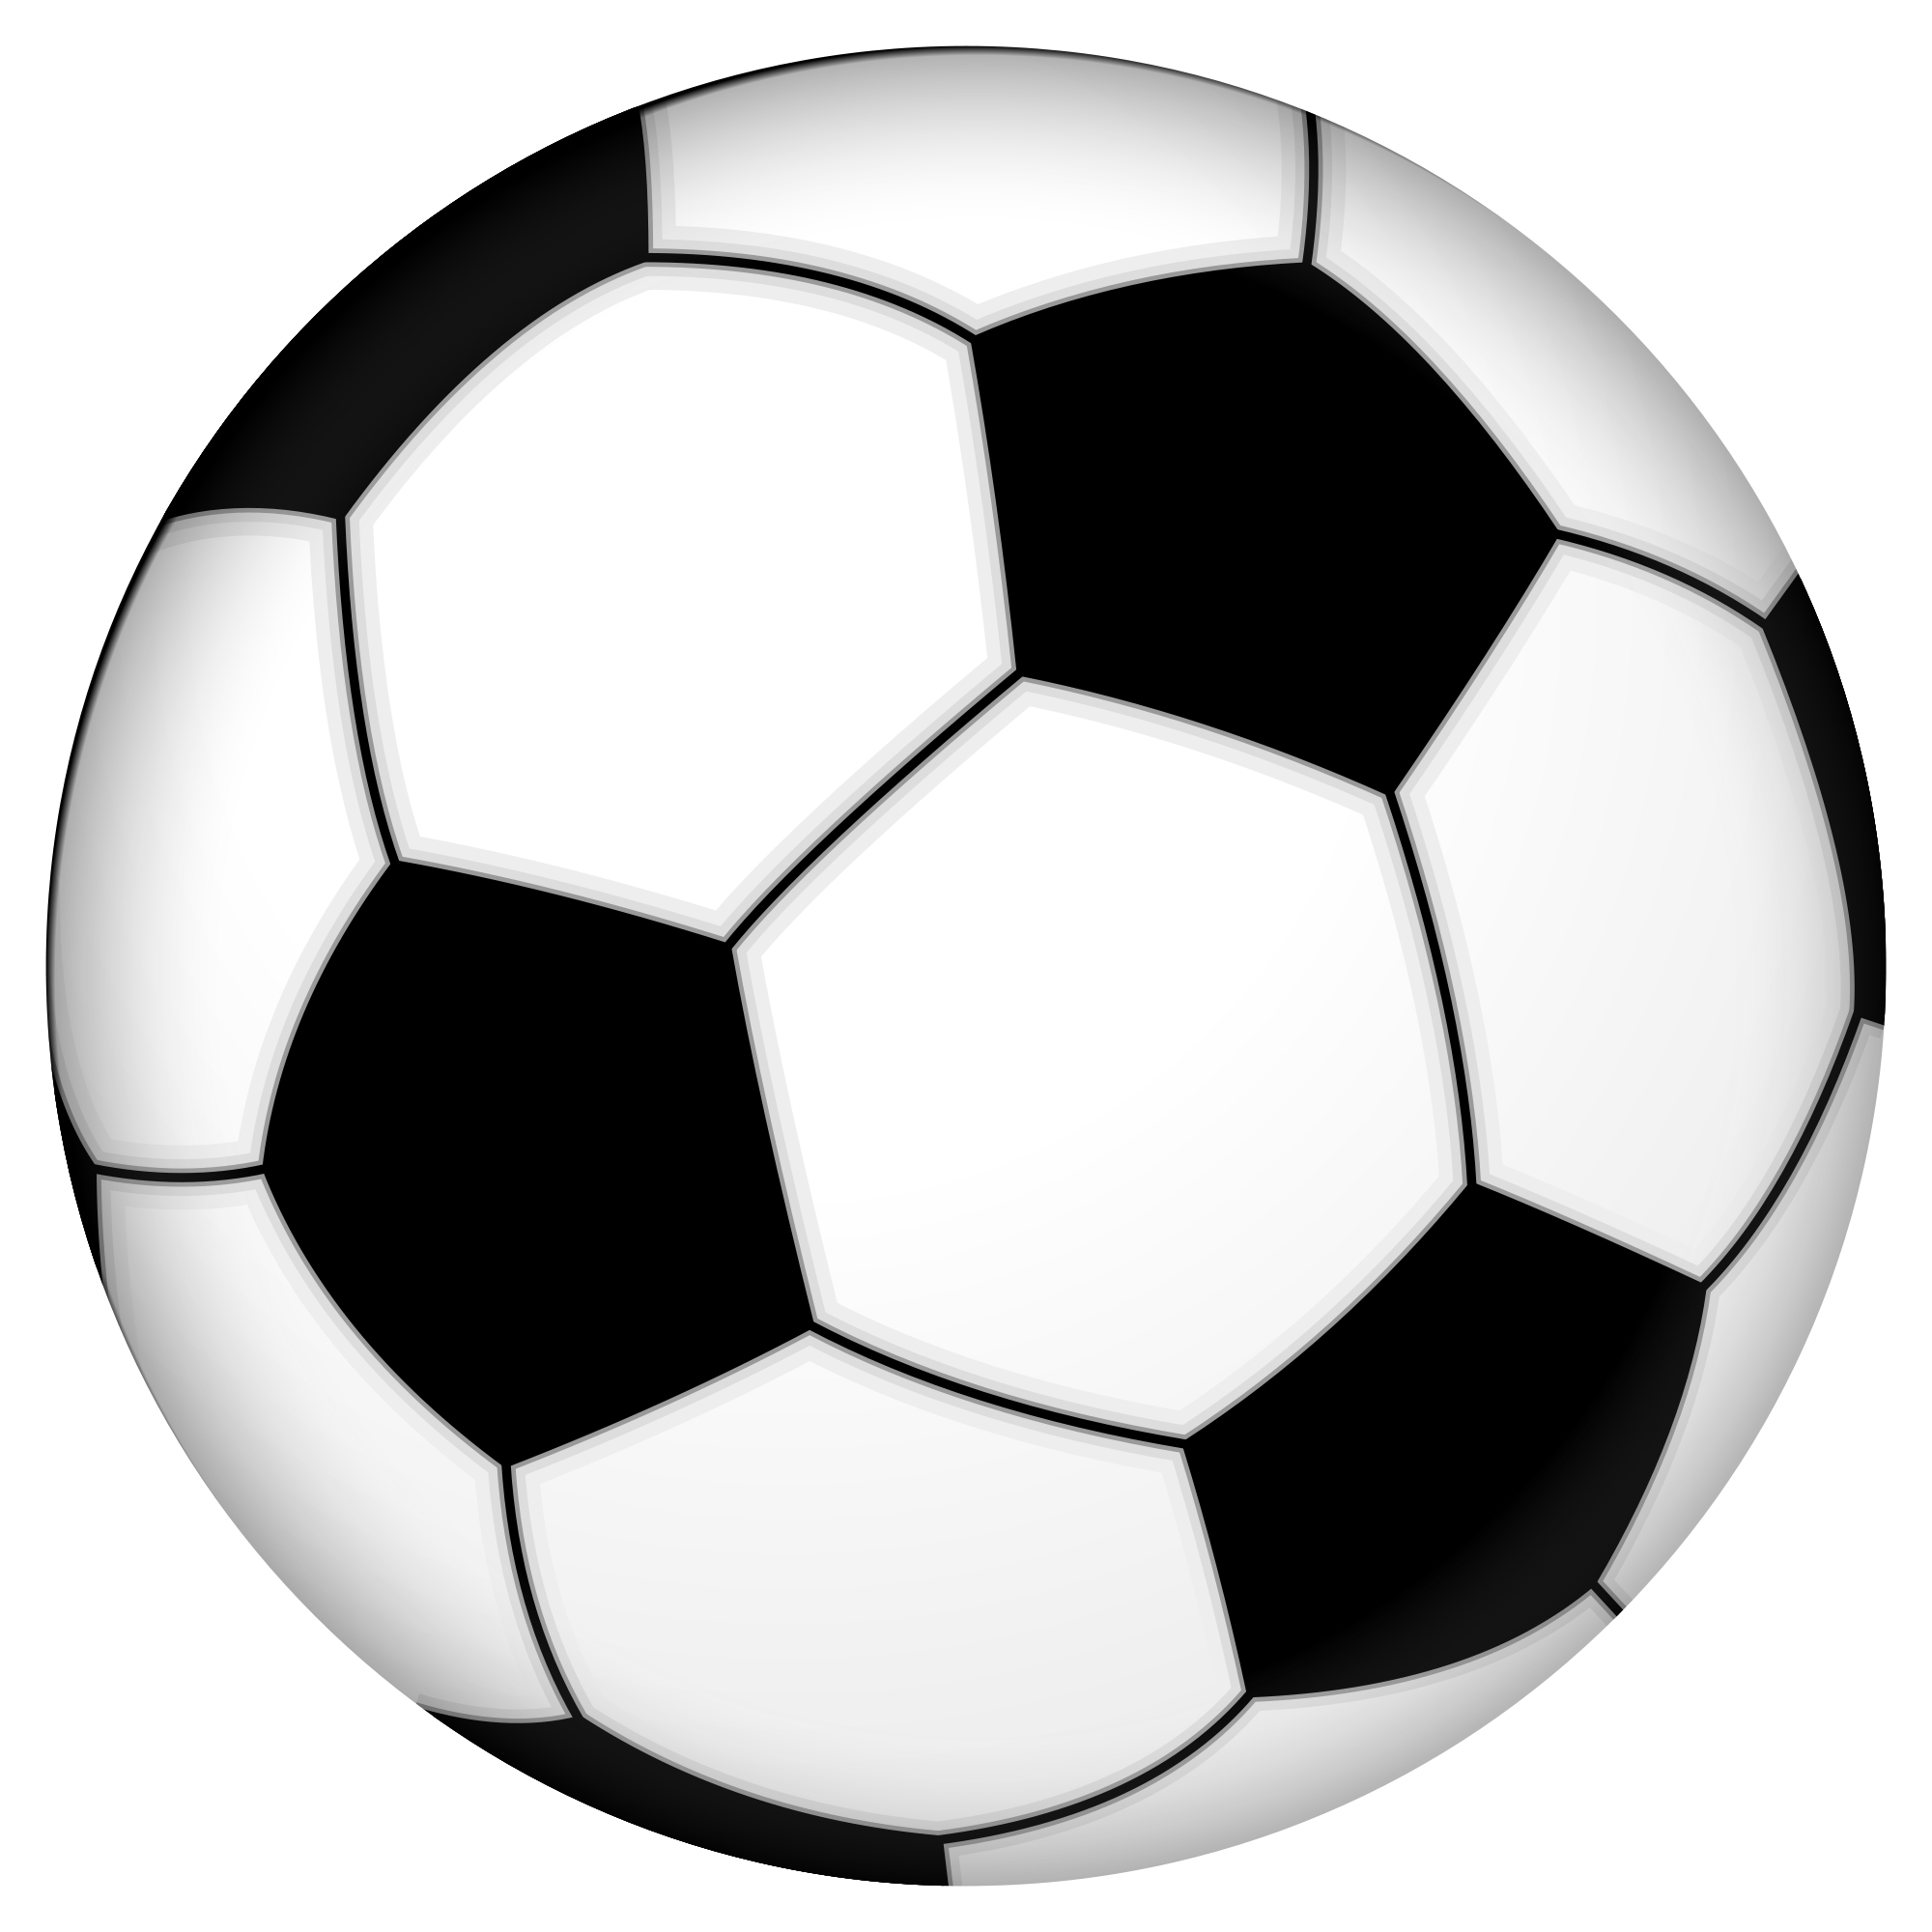 Kicking soccer ball clip art free clipart images